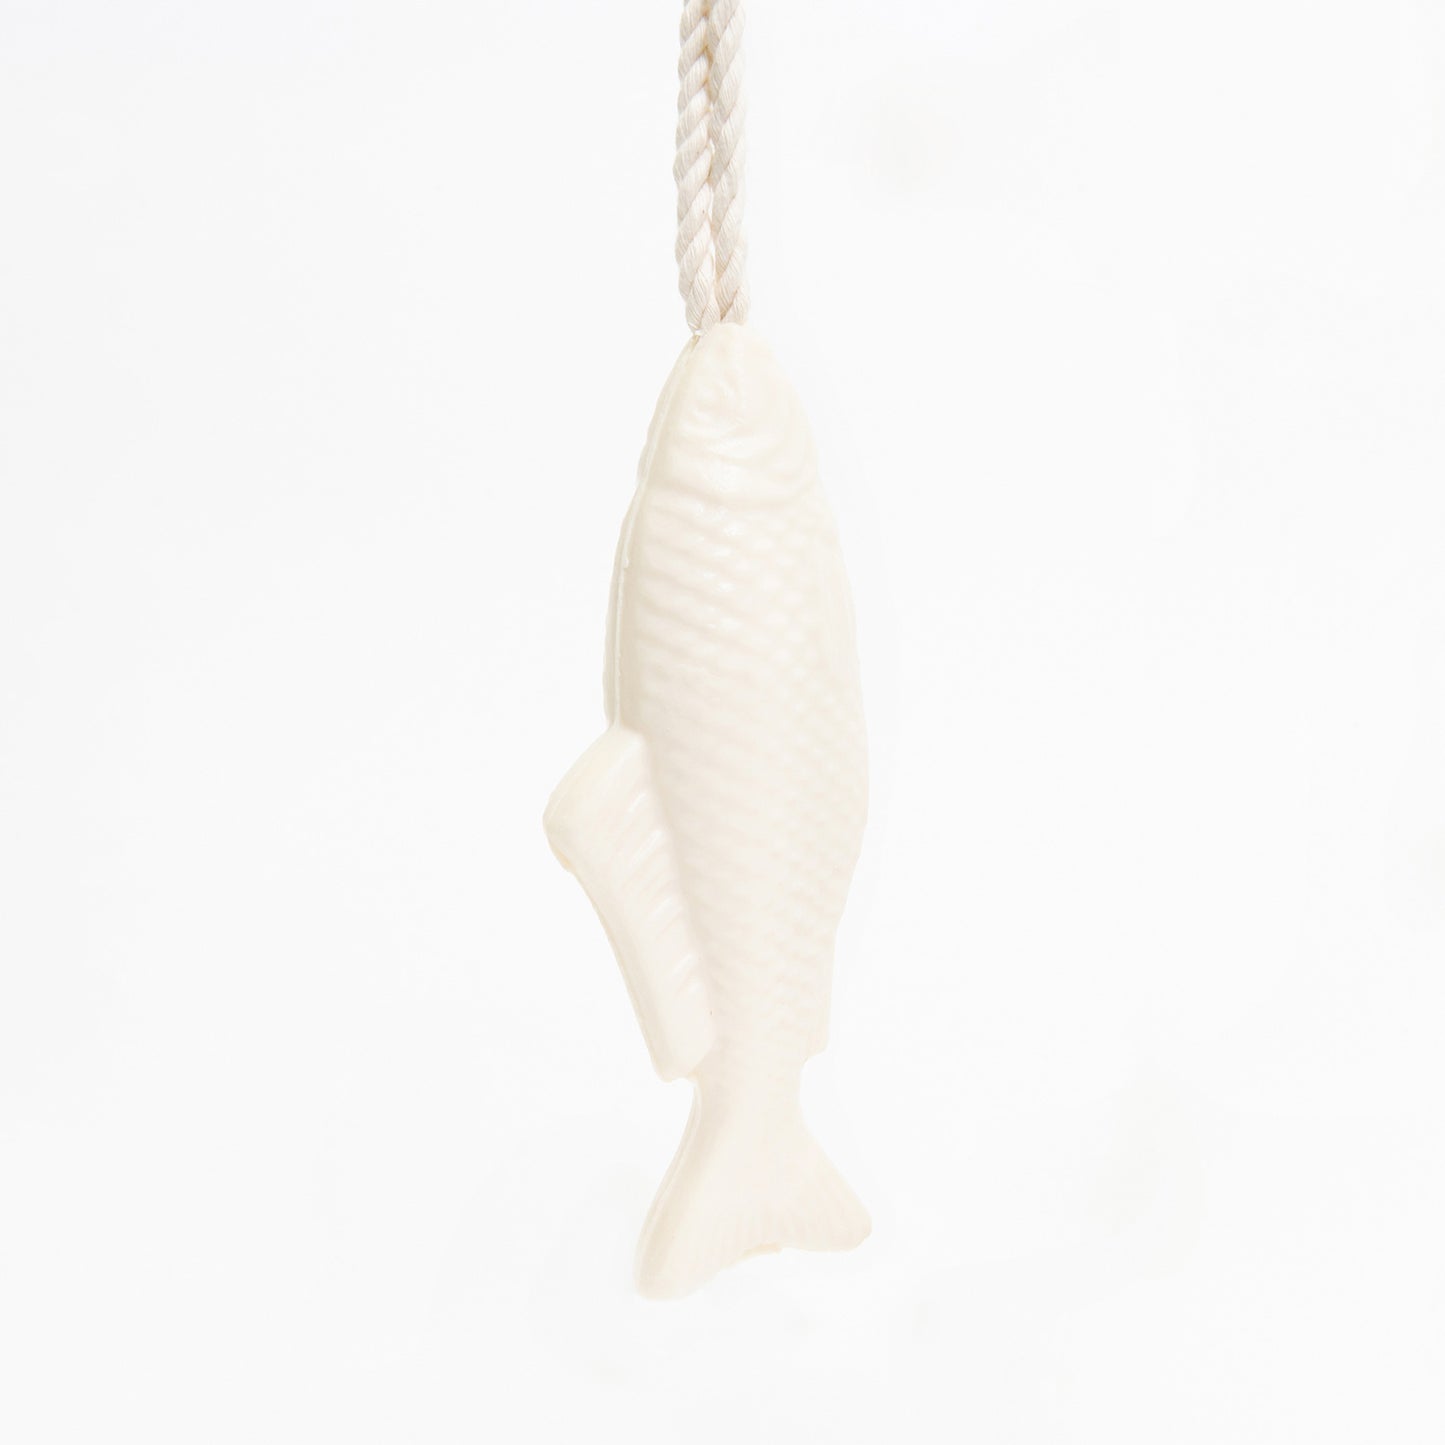 A white soap on a rope with a fish design, pictured on a white background.